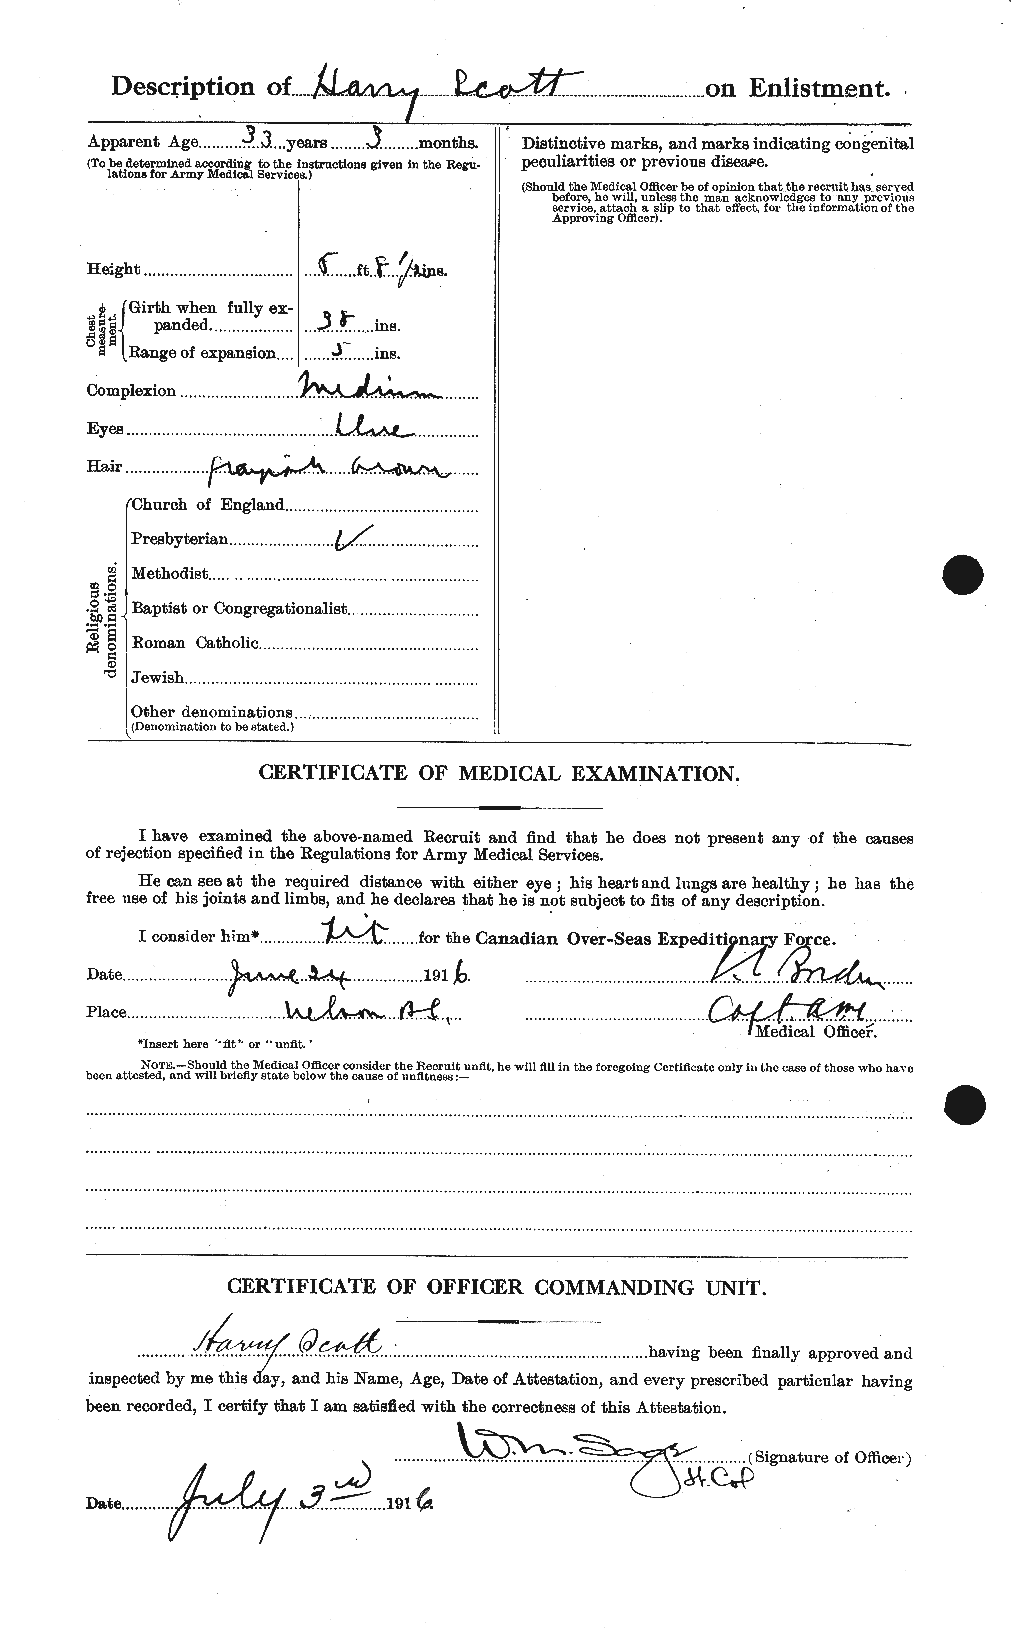 Personnel Records of the First World War - CEF 086326b